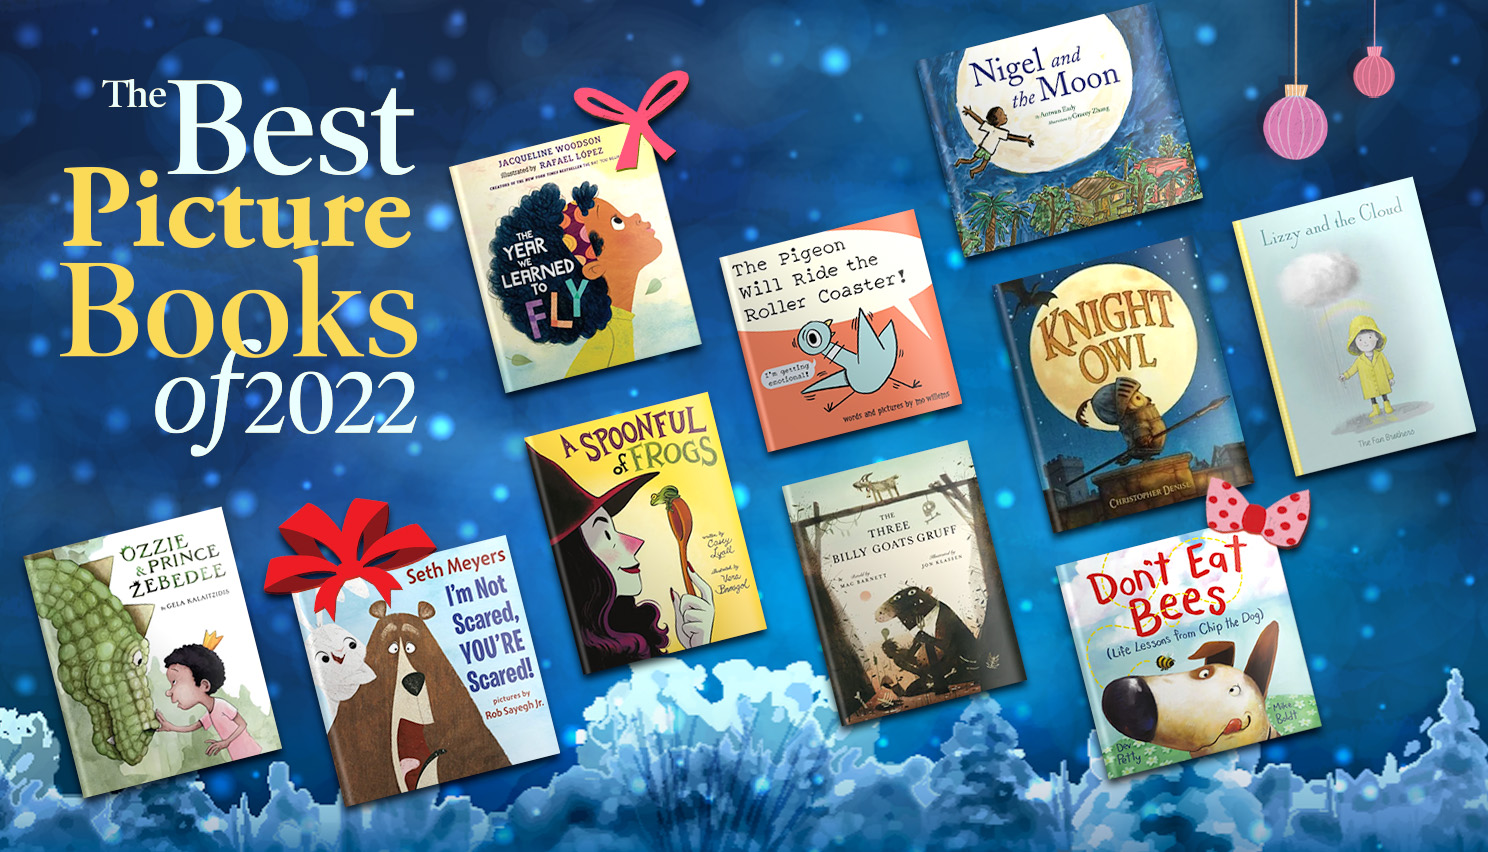 The Best Picture Books for Children of 2022